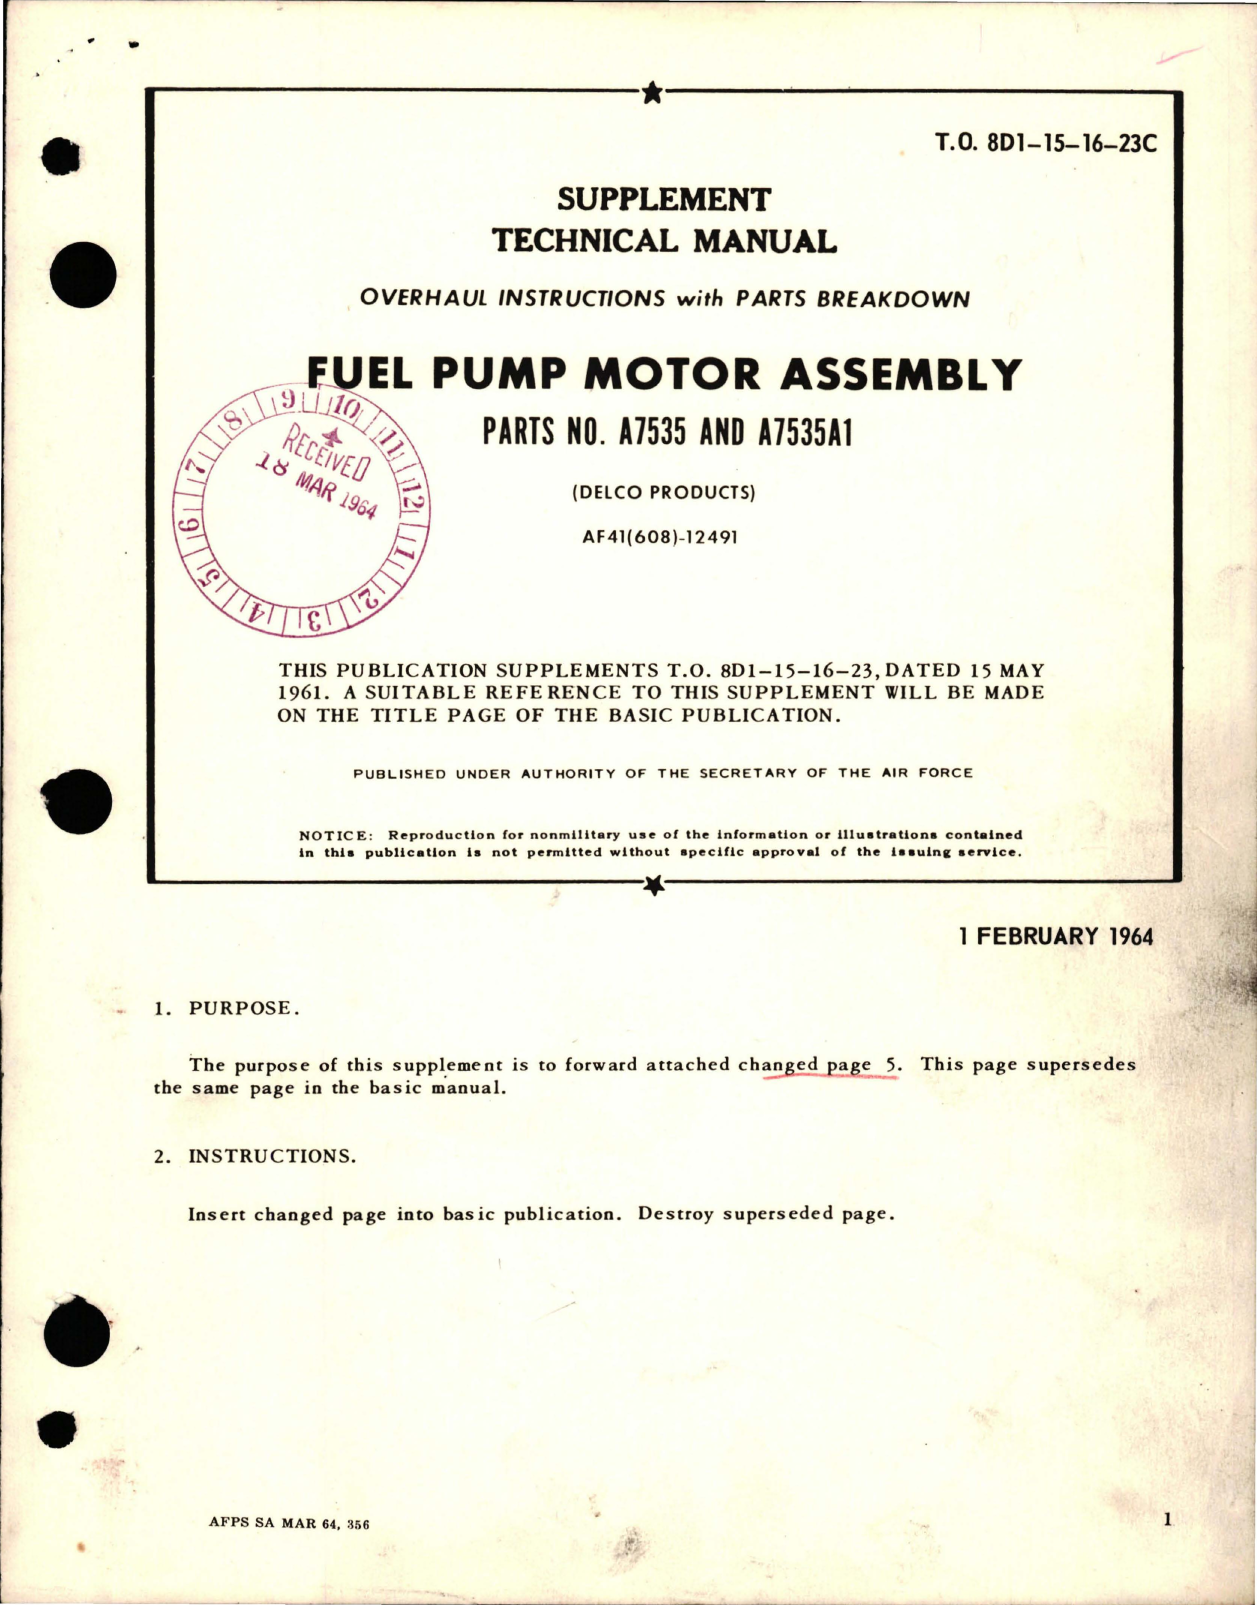 Sample page 1 from AirCorps Library document: Supplement to Overhaul Instructions with Parts Breakdown for Fuel Pump Motor Assembly - Parts A7535 and A7535A1 